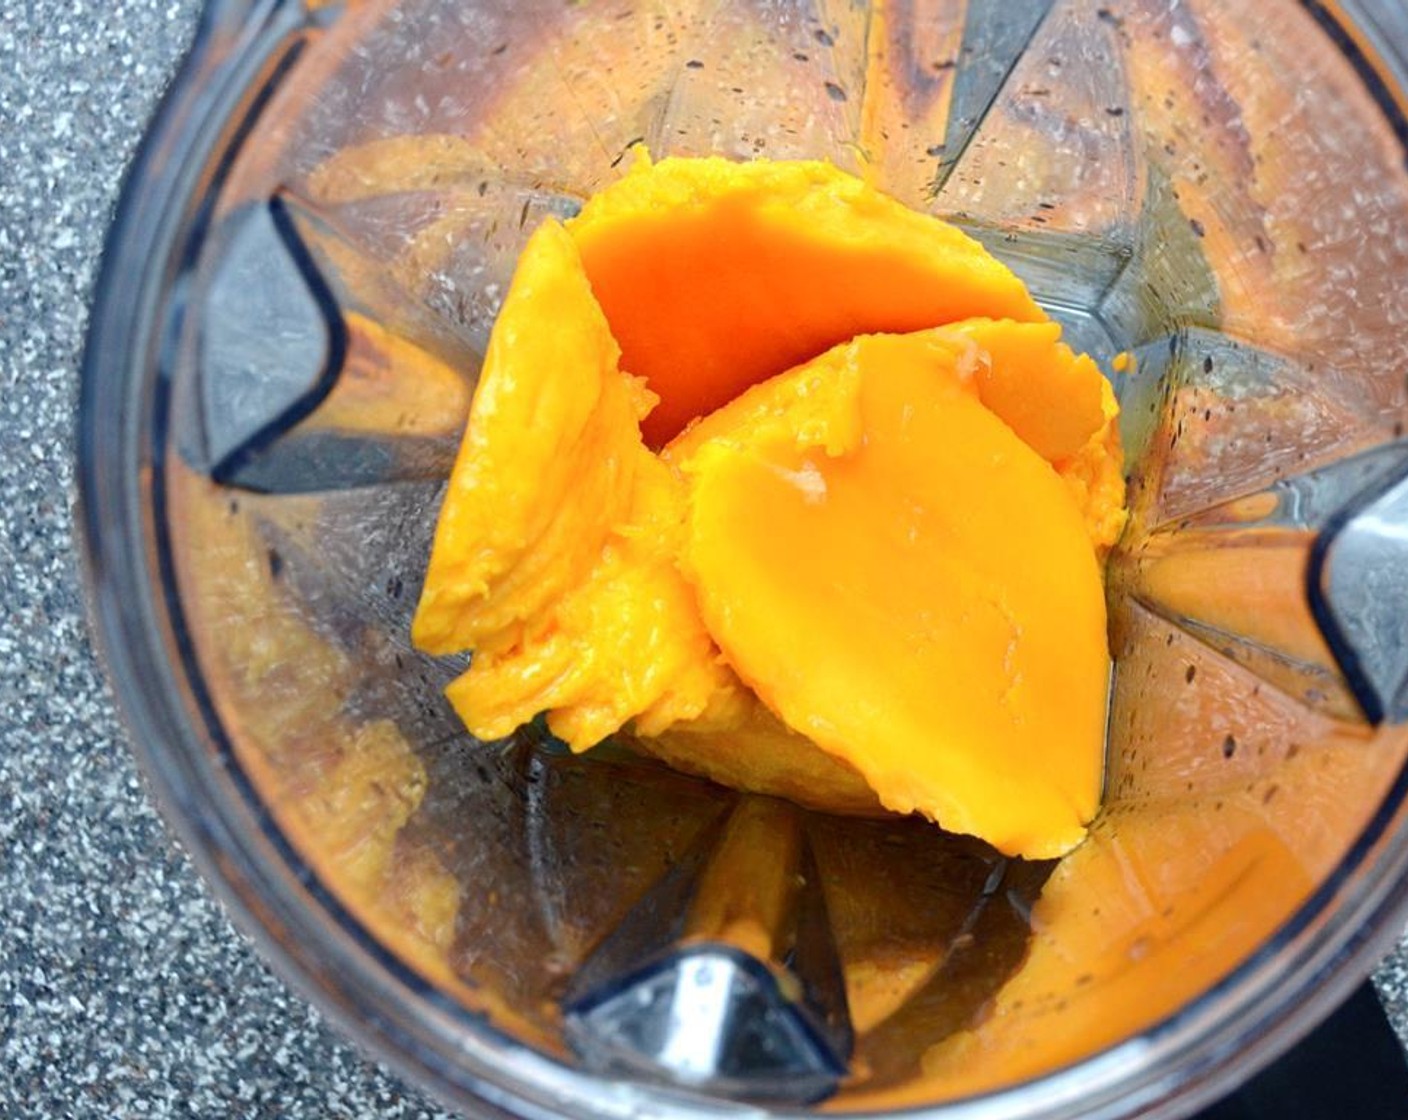 step 2 Transfer the mango to a heavy-duty blender or food processor and add the juice from Lime (1), Light Corn Syrup (1/4 cup), and Salt (1/4 tsp).